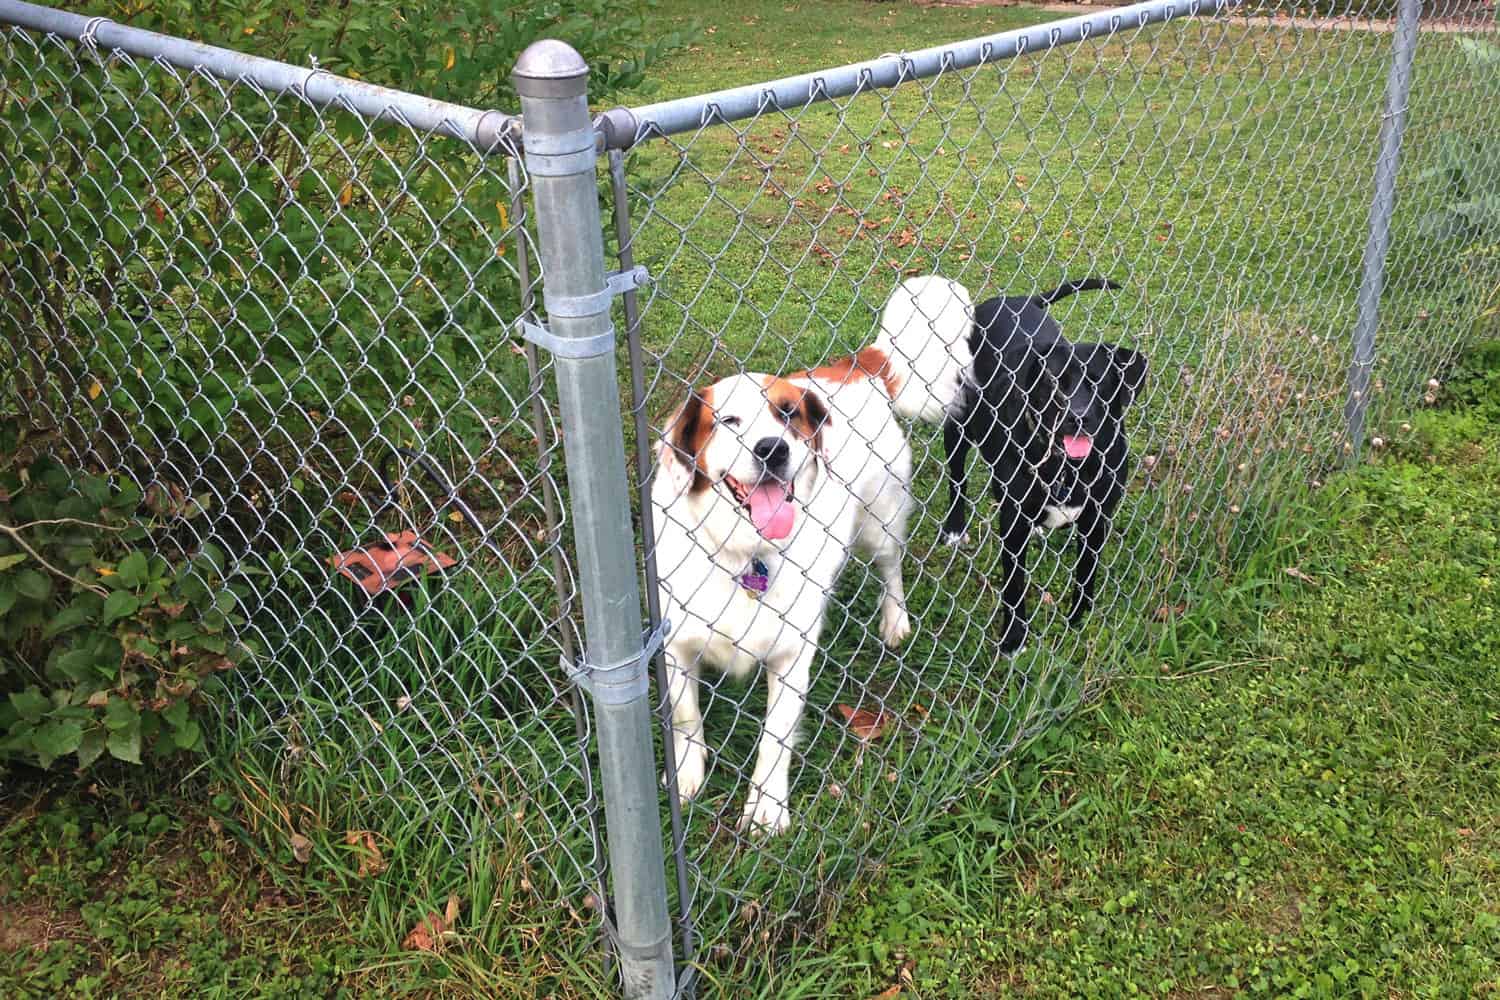 A pair of dogs, one black and one white and brown, are seen through a chain link fence.